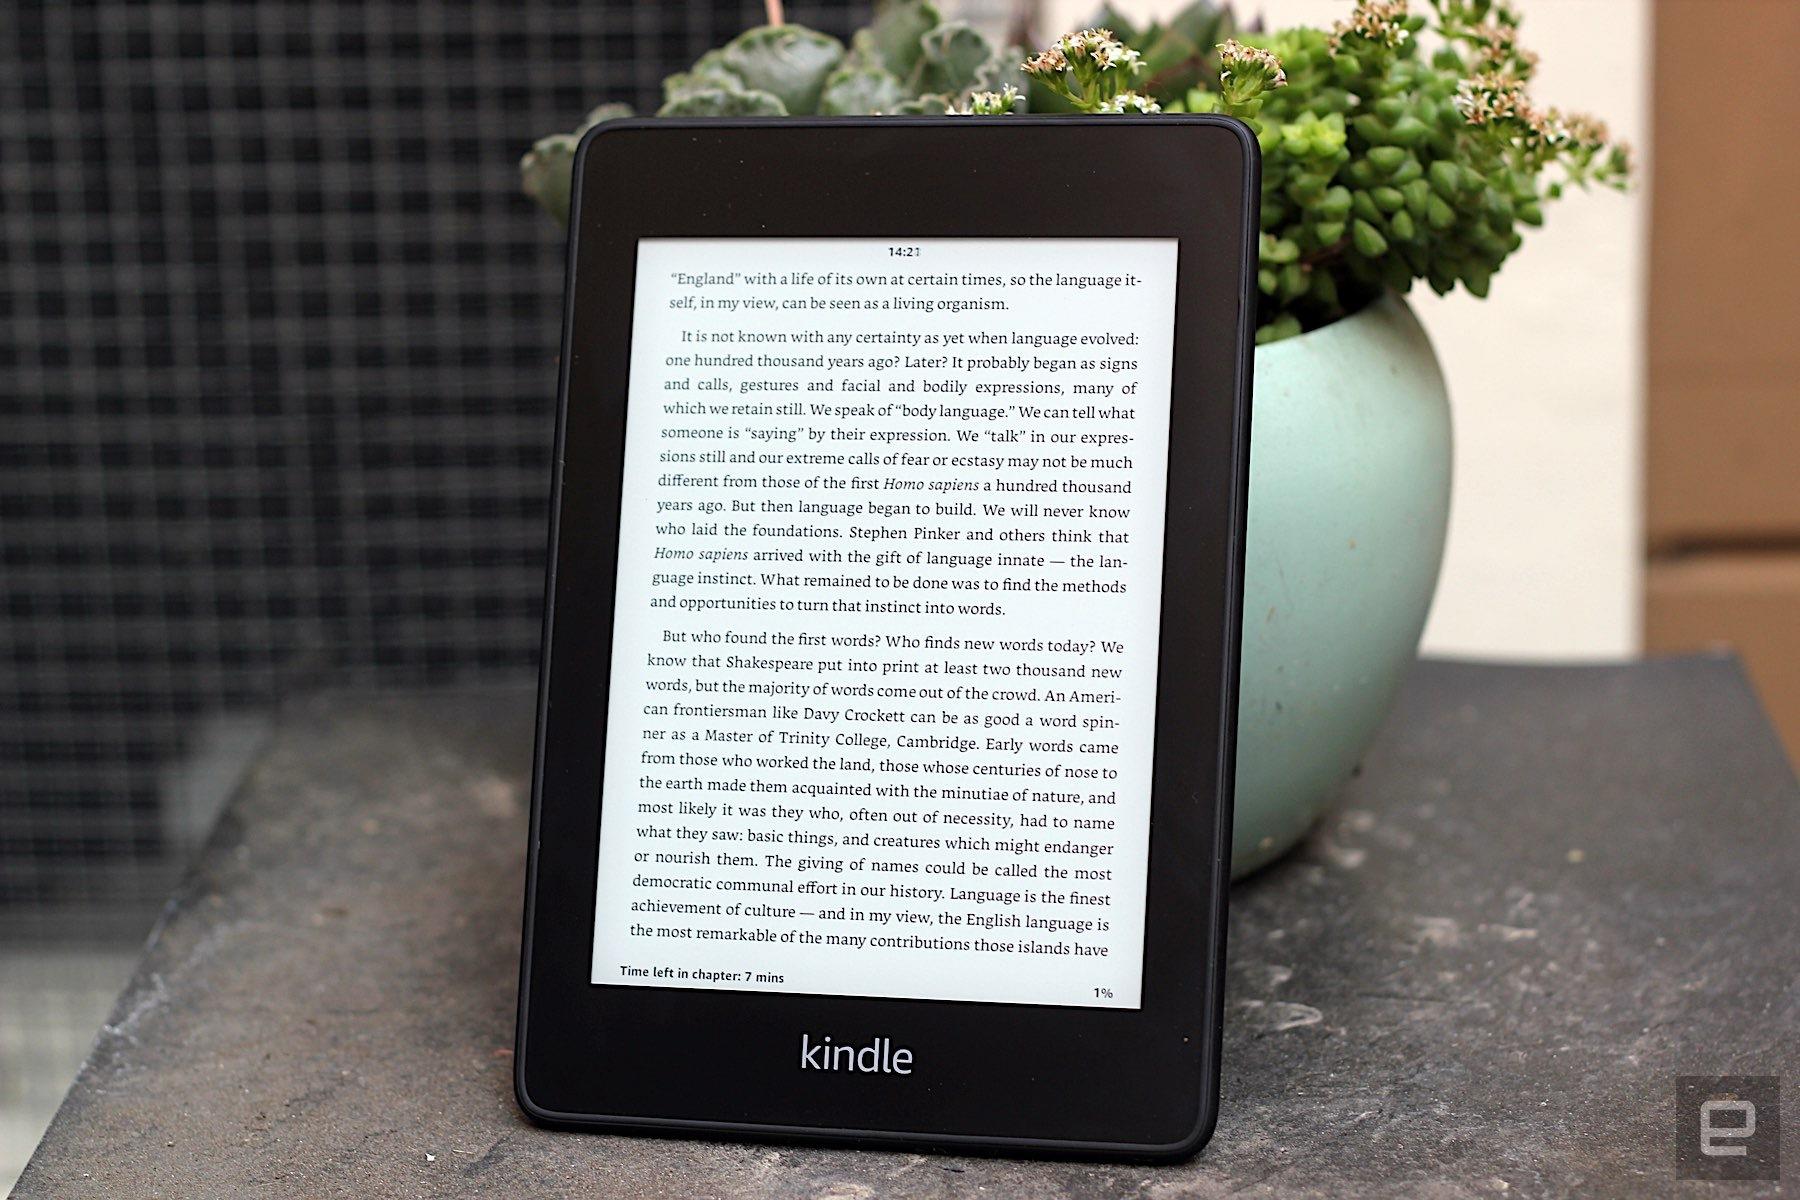 prime day kindle paperwhite